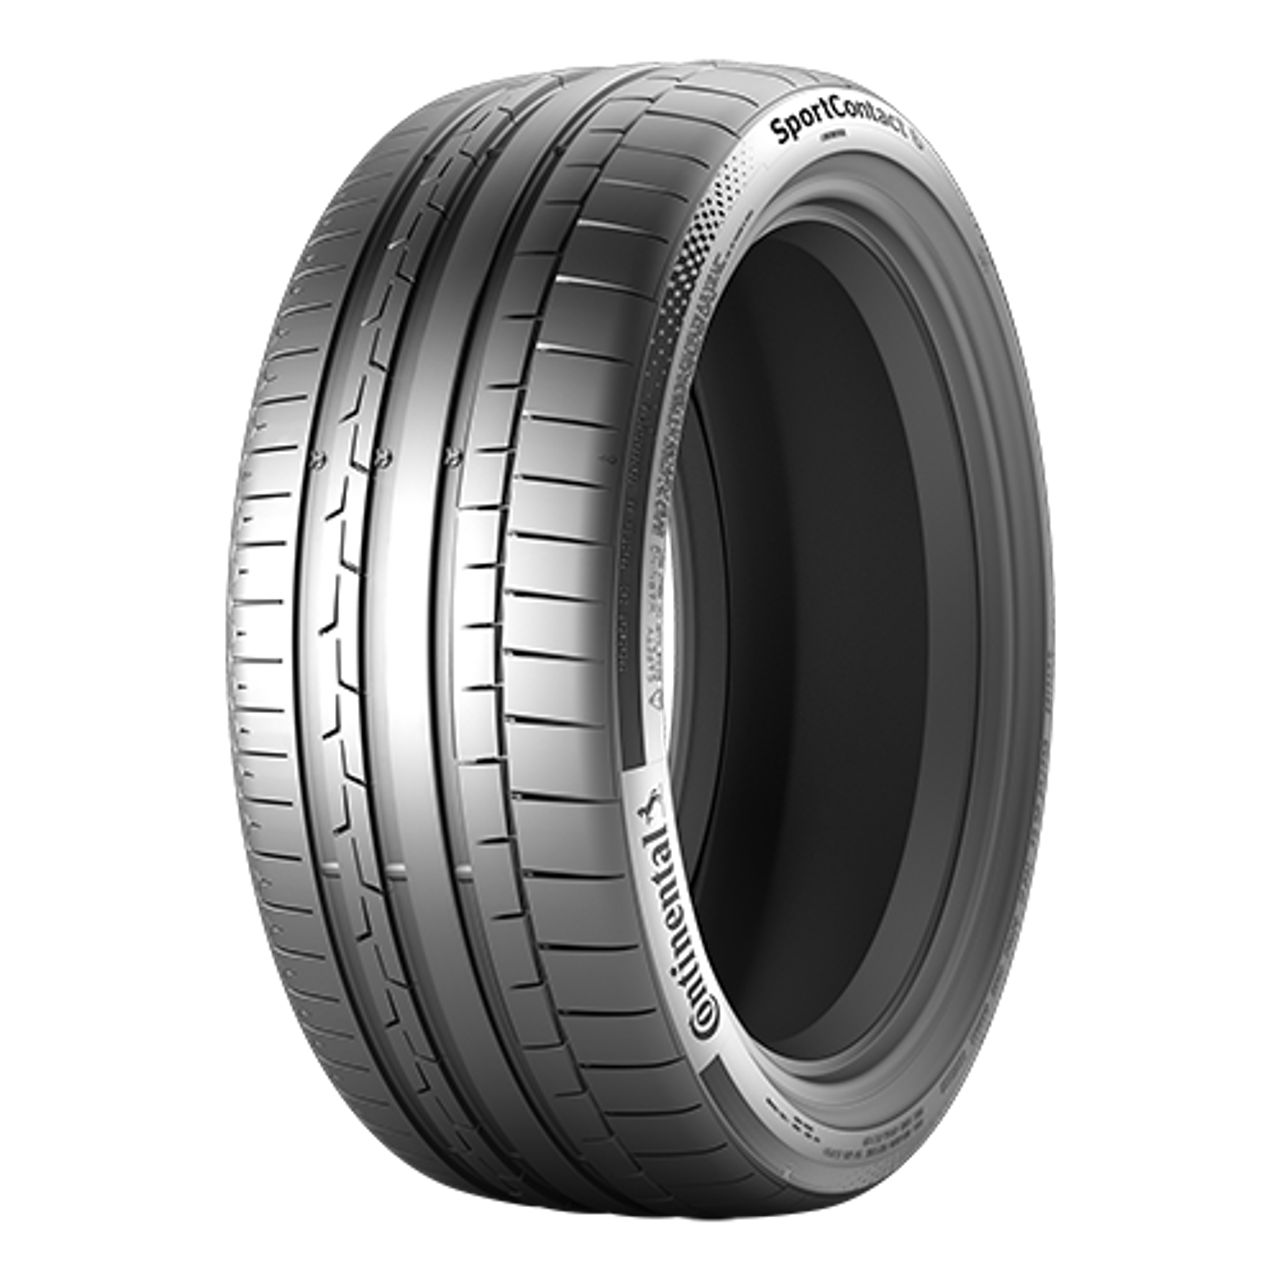 CONTINENTAL SPORTCONTACT 6 (AO) (EVc) 285/40R21 109Y FR